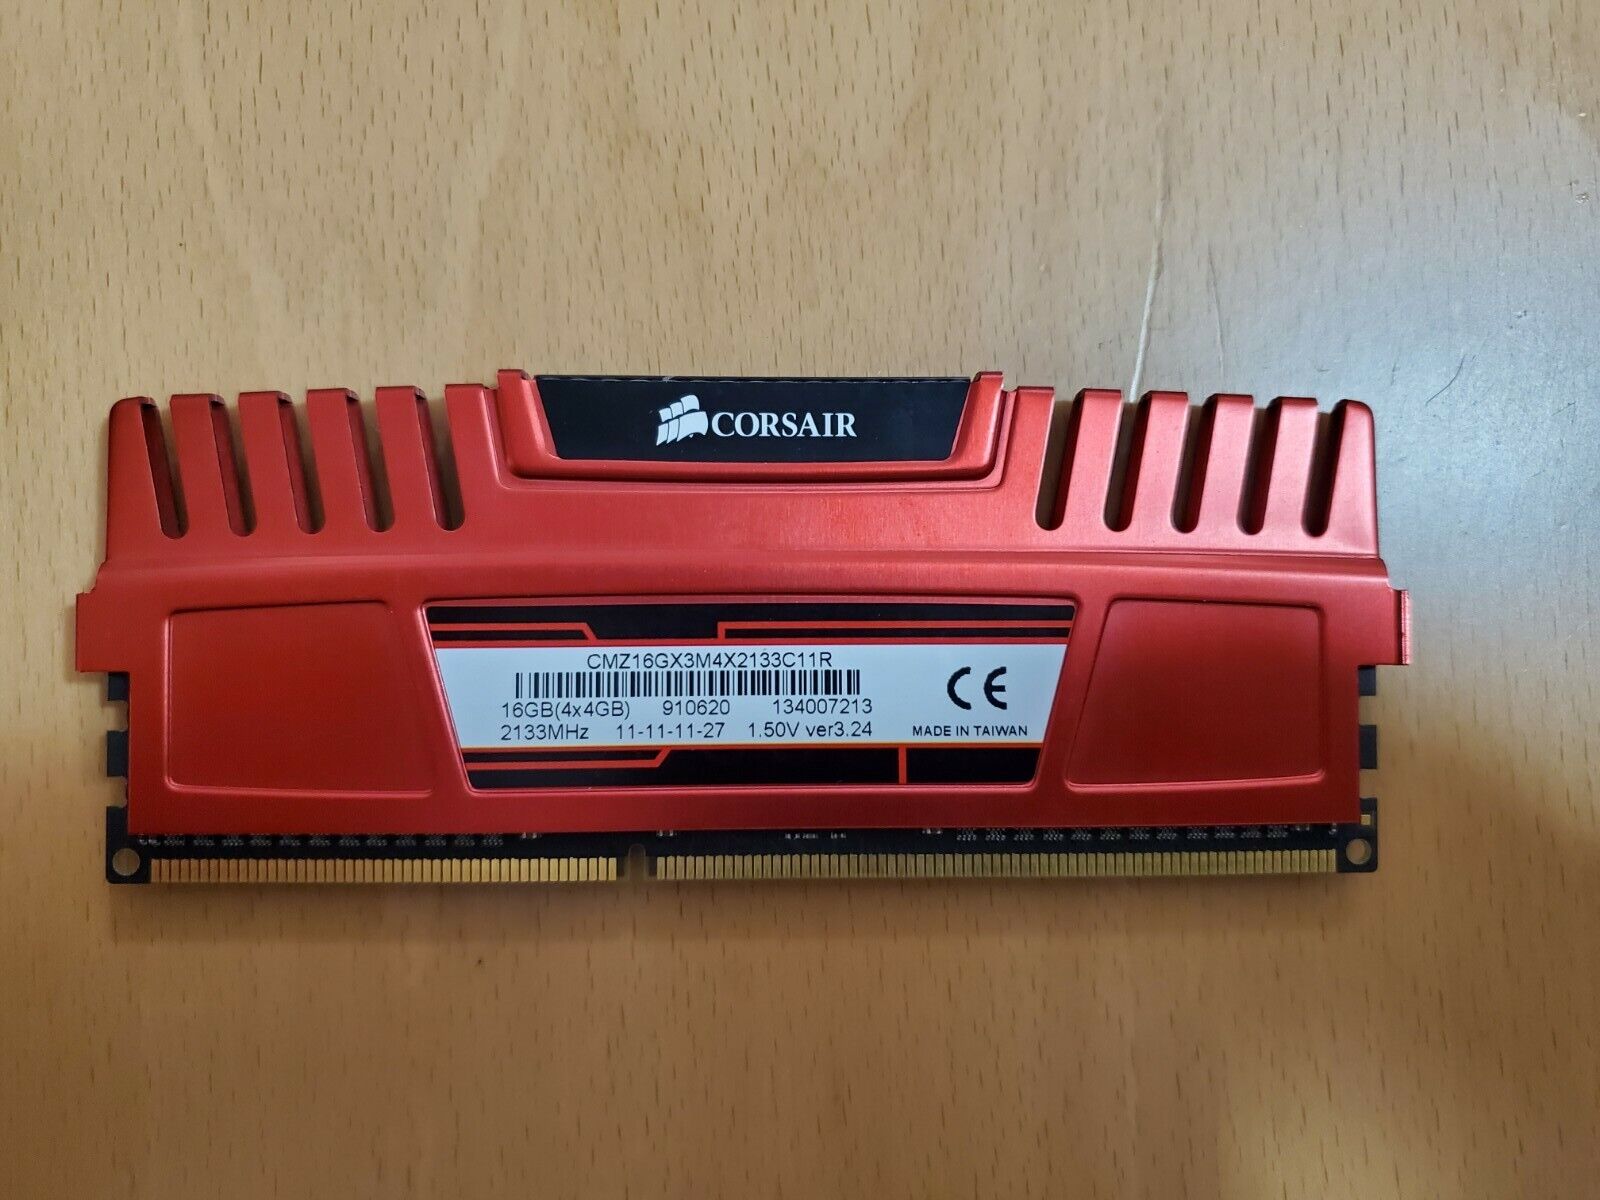 Corsair Vengeance 16GB DDR3 2133mhz PC3-17000 for Intel X79 chipsets VERY RARE